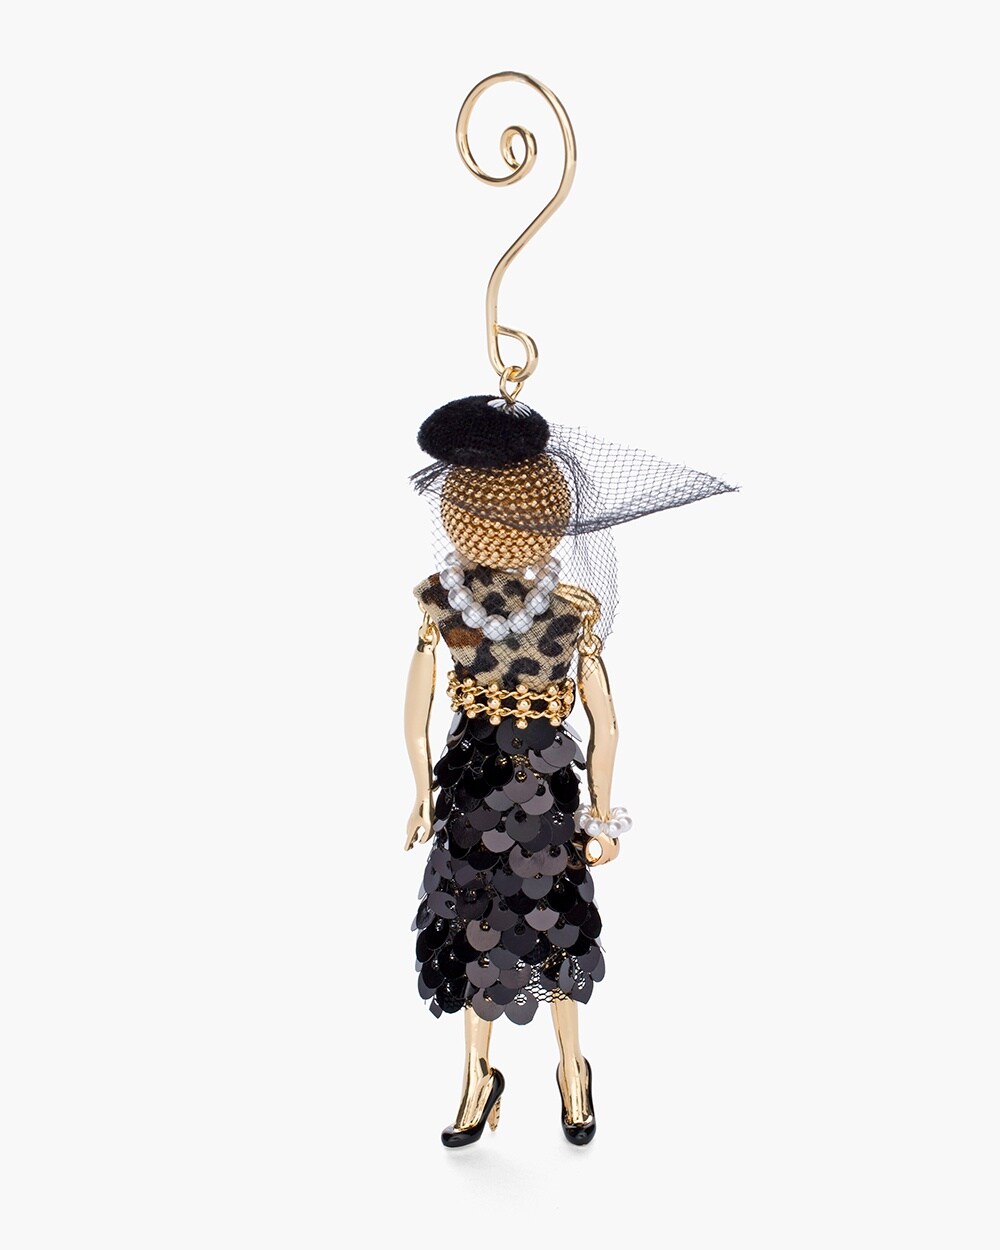 Sequined Skirt Lady Ornament